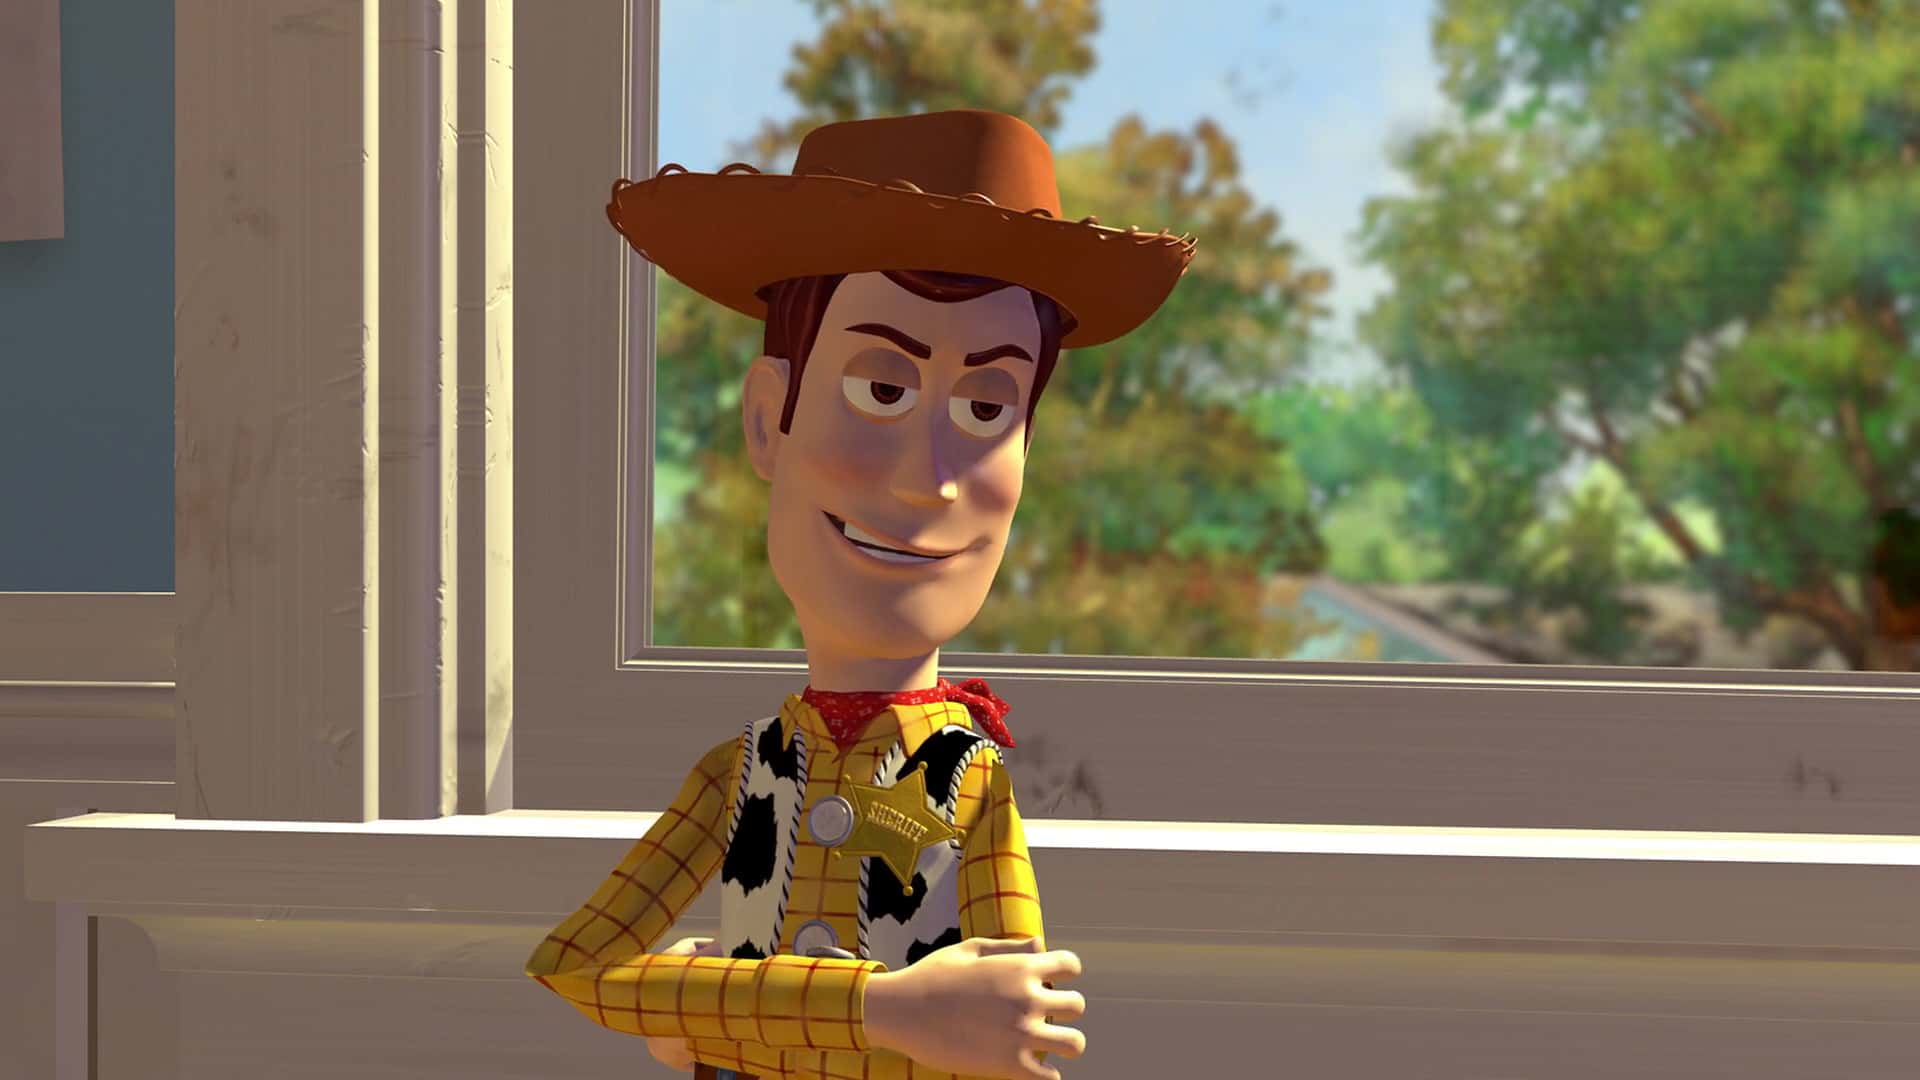 33 Friendly Facts About Toy Story.